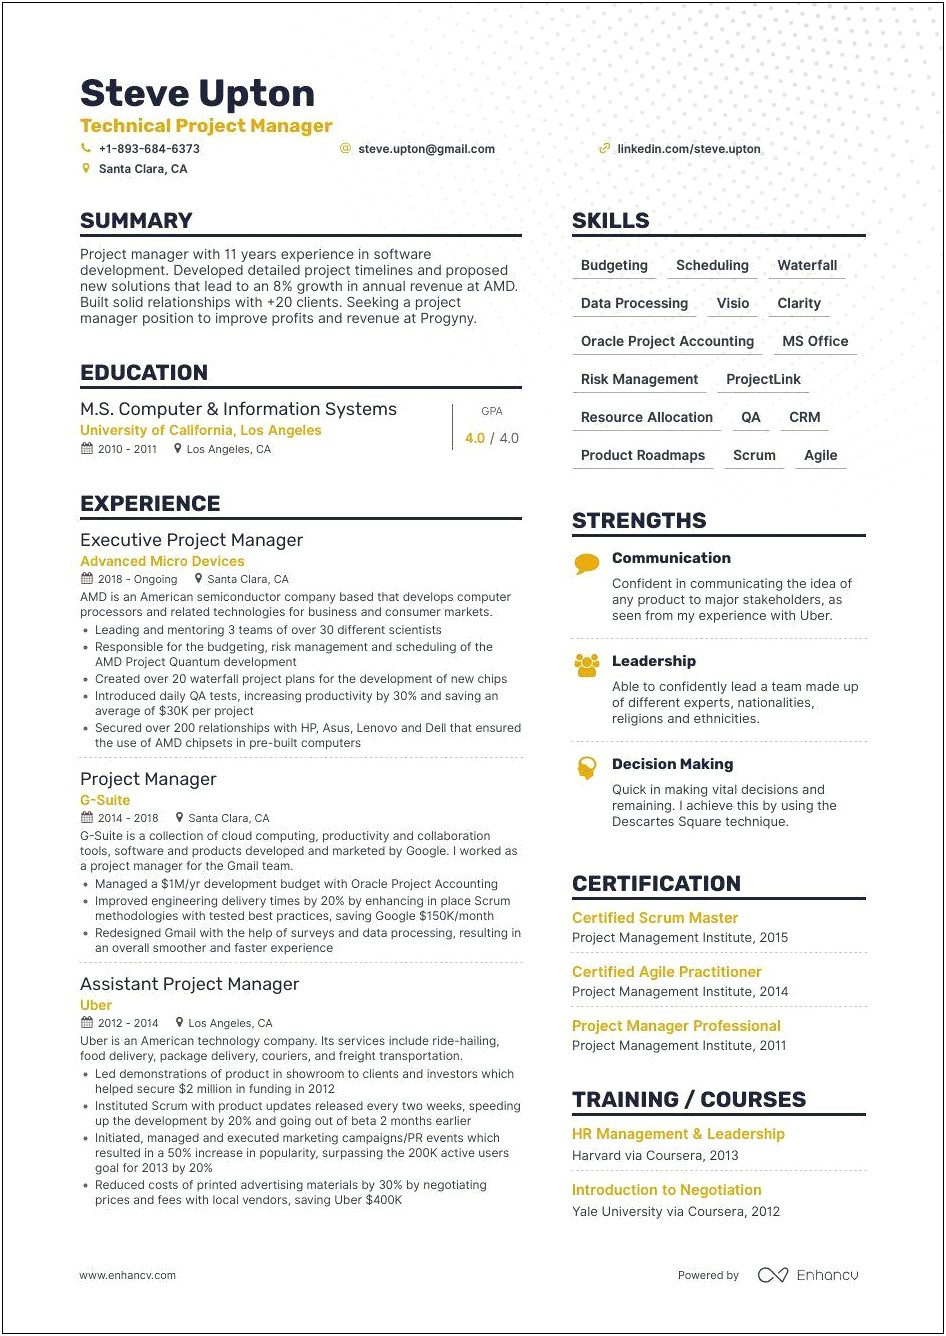 Wealth Of Project Management Experience On Resume